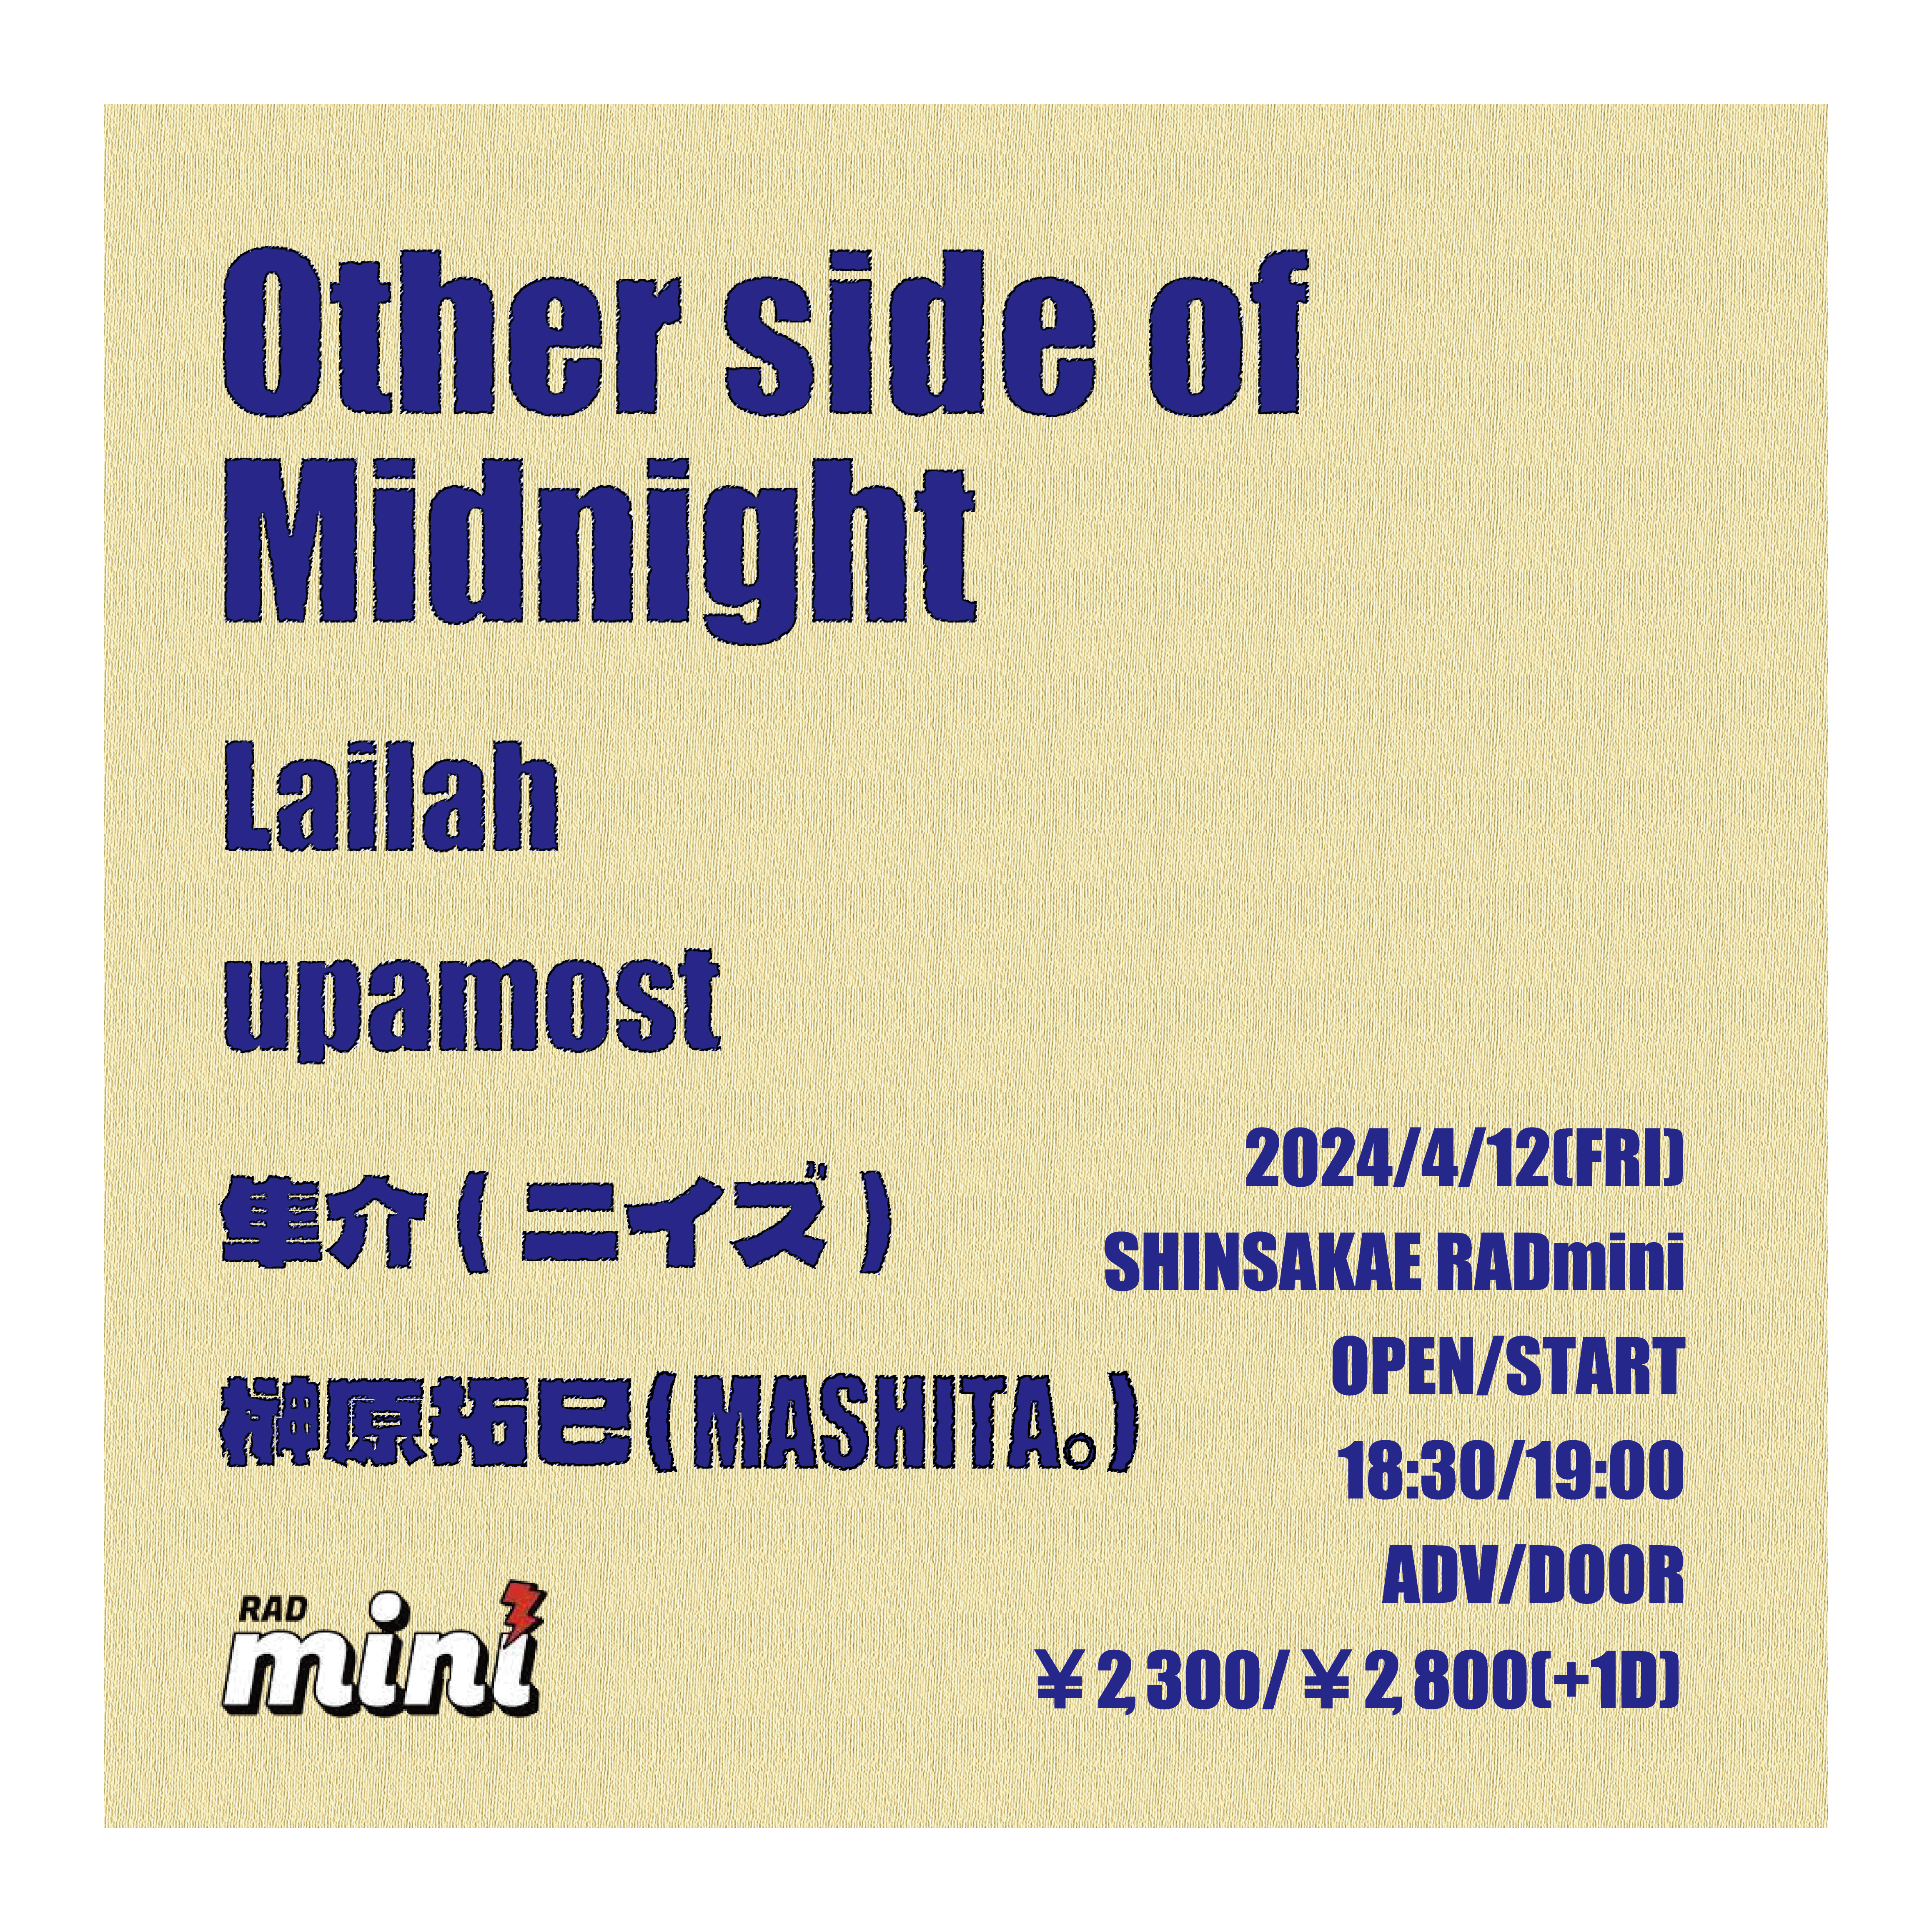 Other side of Midnight